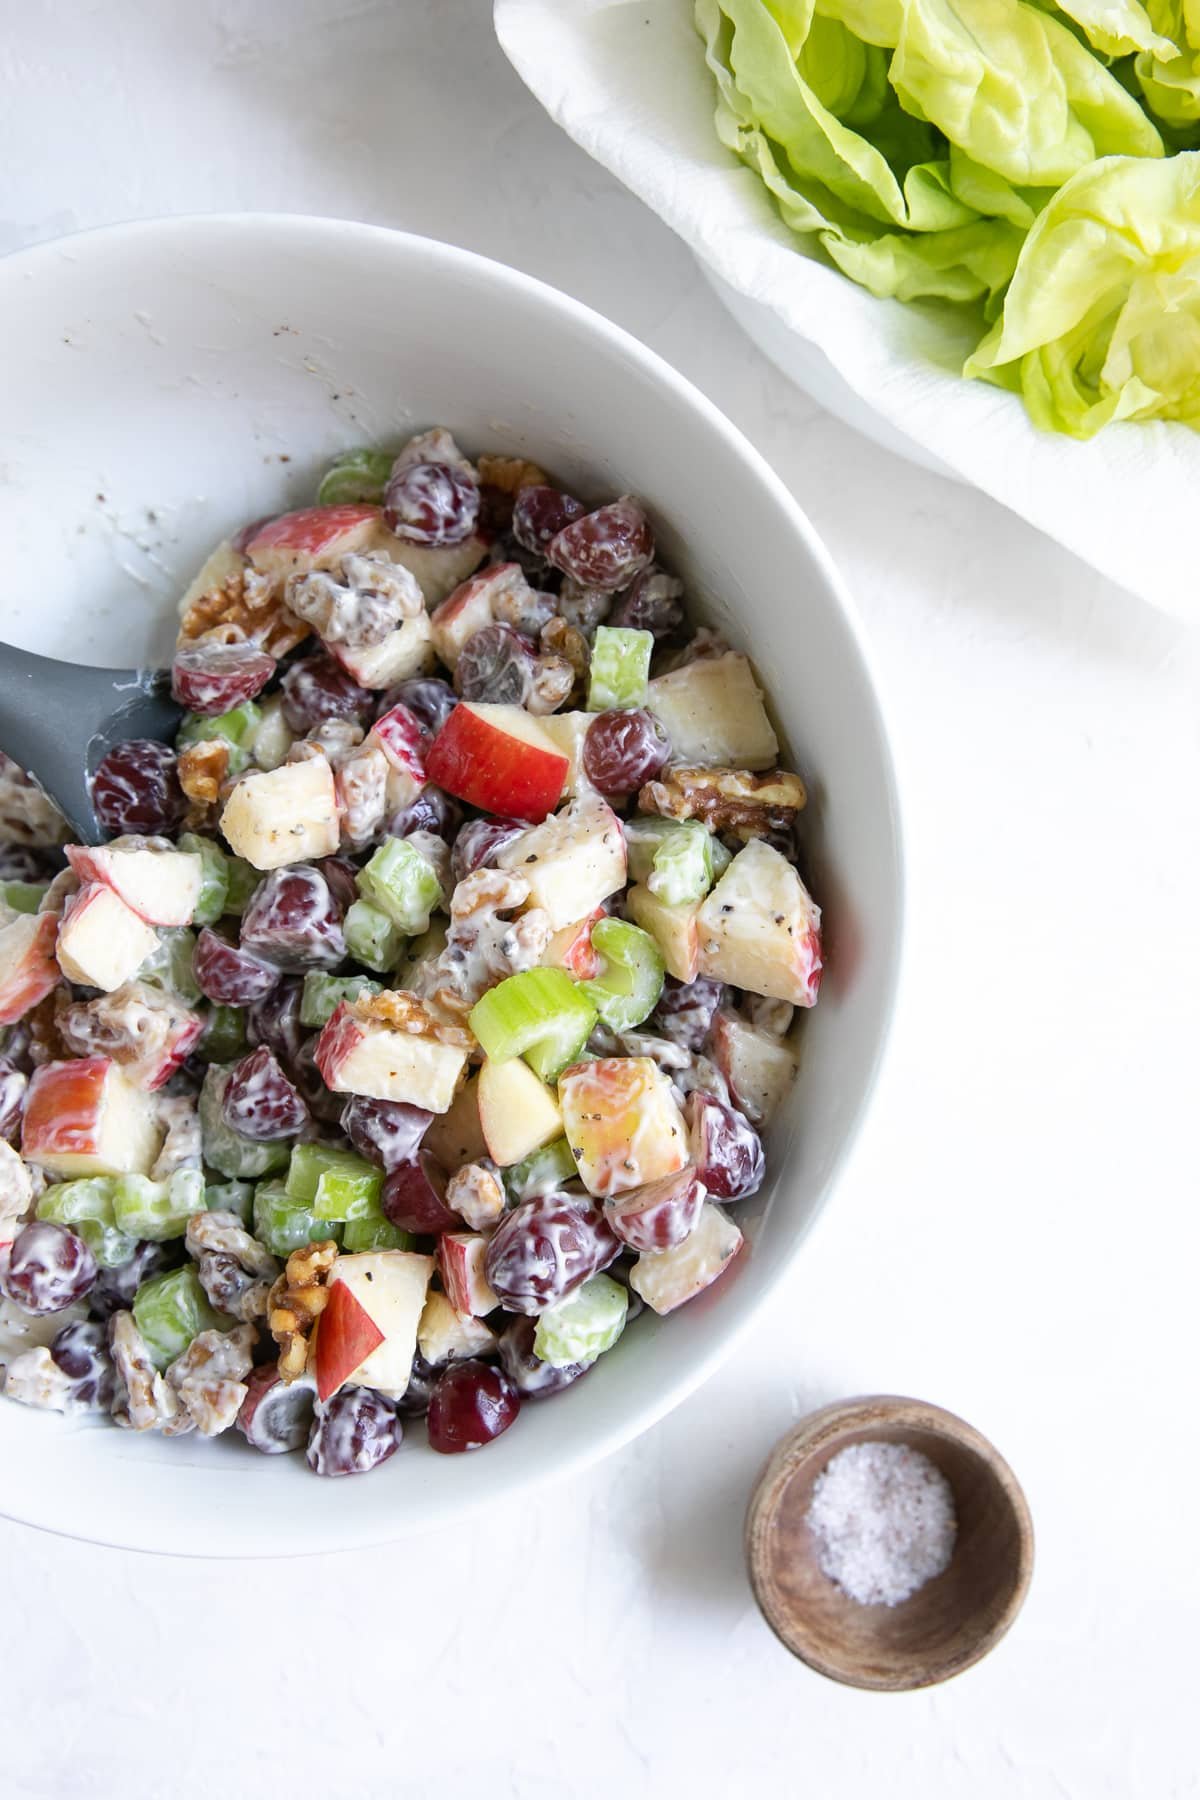 Salad made with diced apples, grapes, walnuts, and chopped celery, tossed in mayonnaise